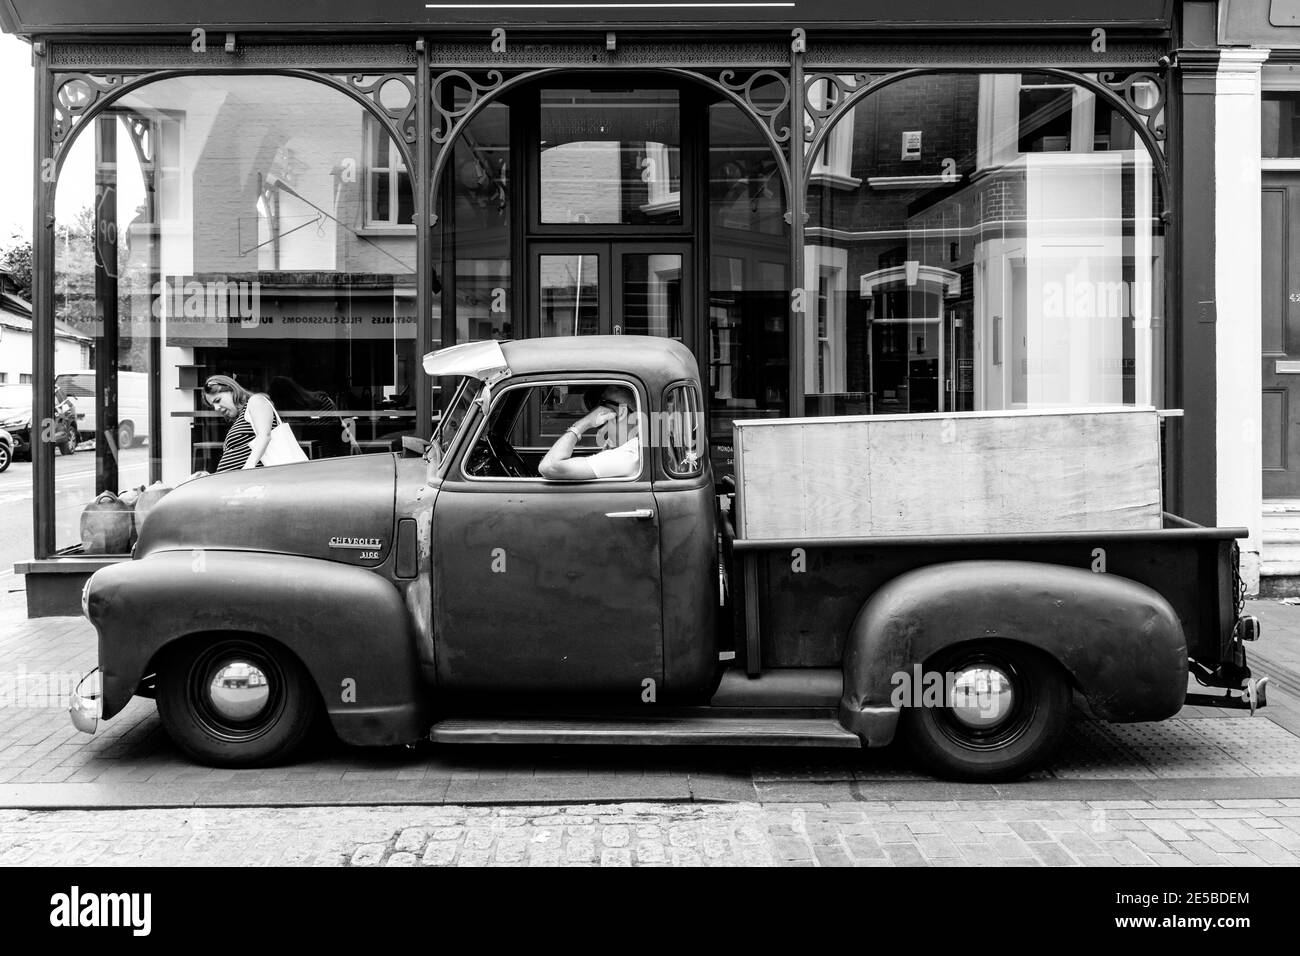 A Classice Chevrolet 3100 Car/Truck Outside A Shop In The Town Of Lewes, East Sussex, UK. Stock Photo